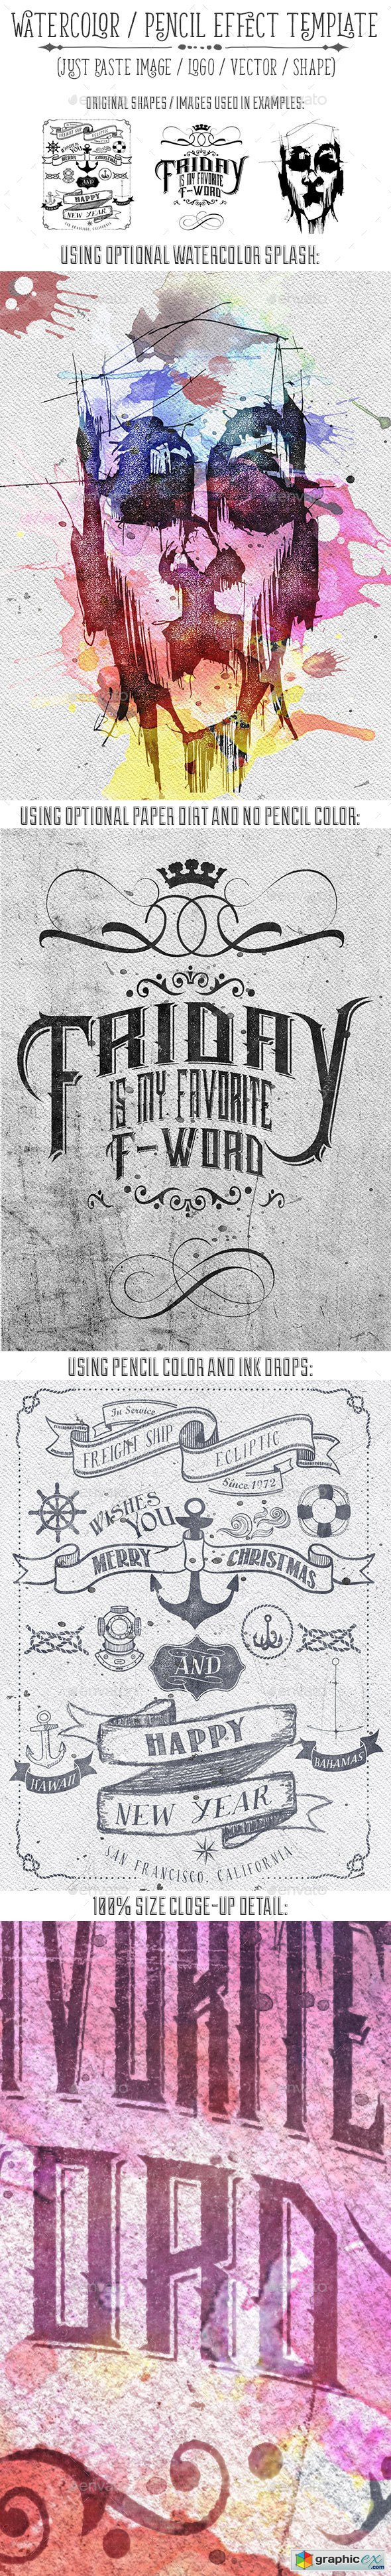 Watercolor Or Pencil Press Style Text Logo Image Treatment